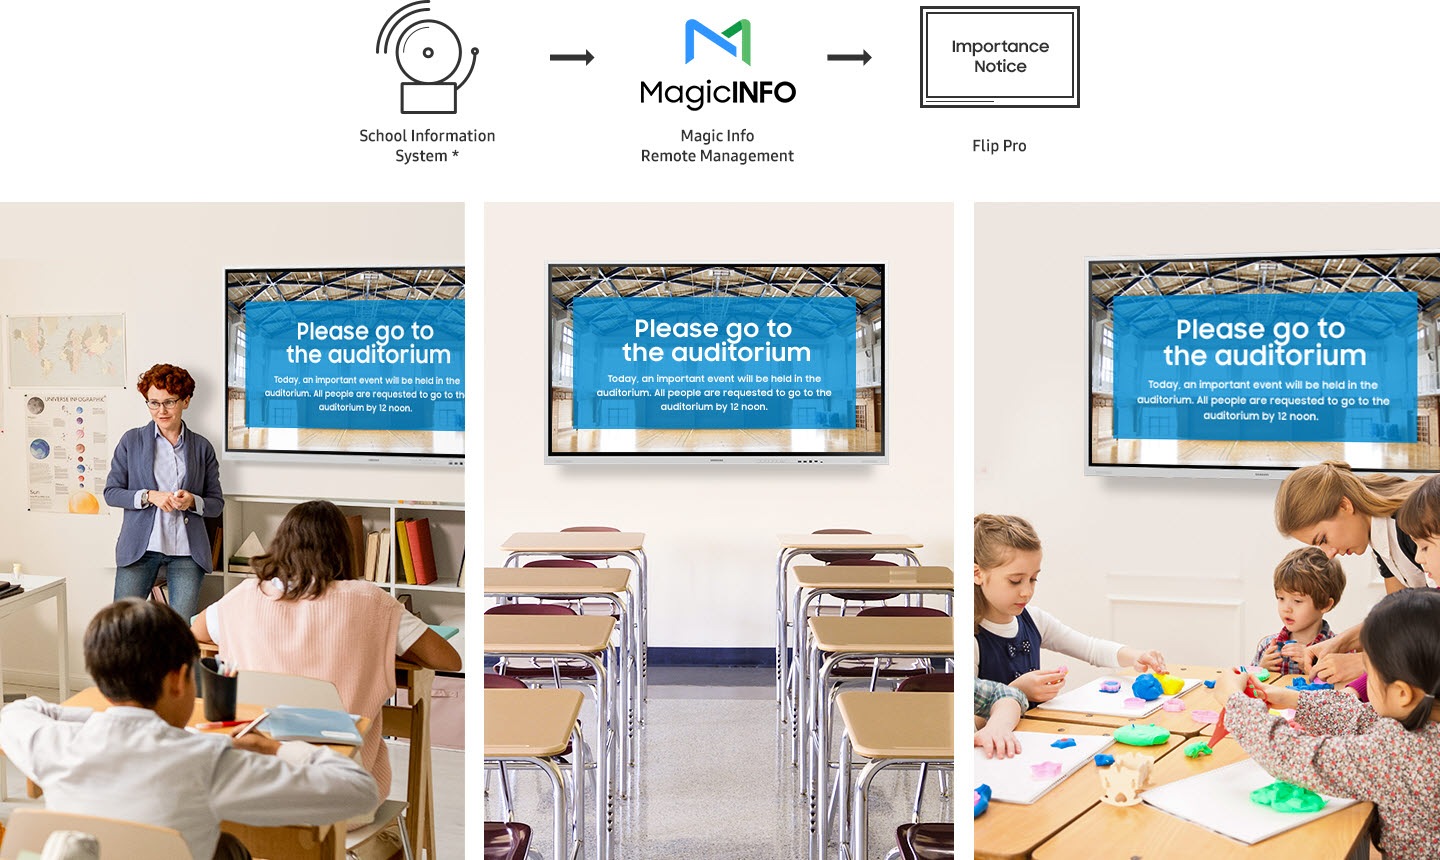 The School information system* is simultaneously displaying the Importance notice on Flip Pro installed in different classrooms through Magic info remote management.